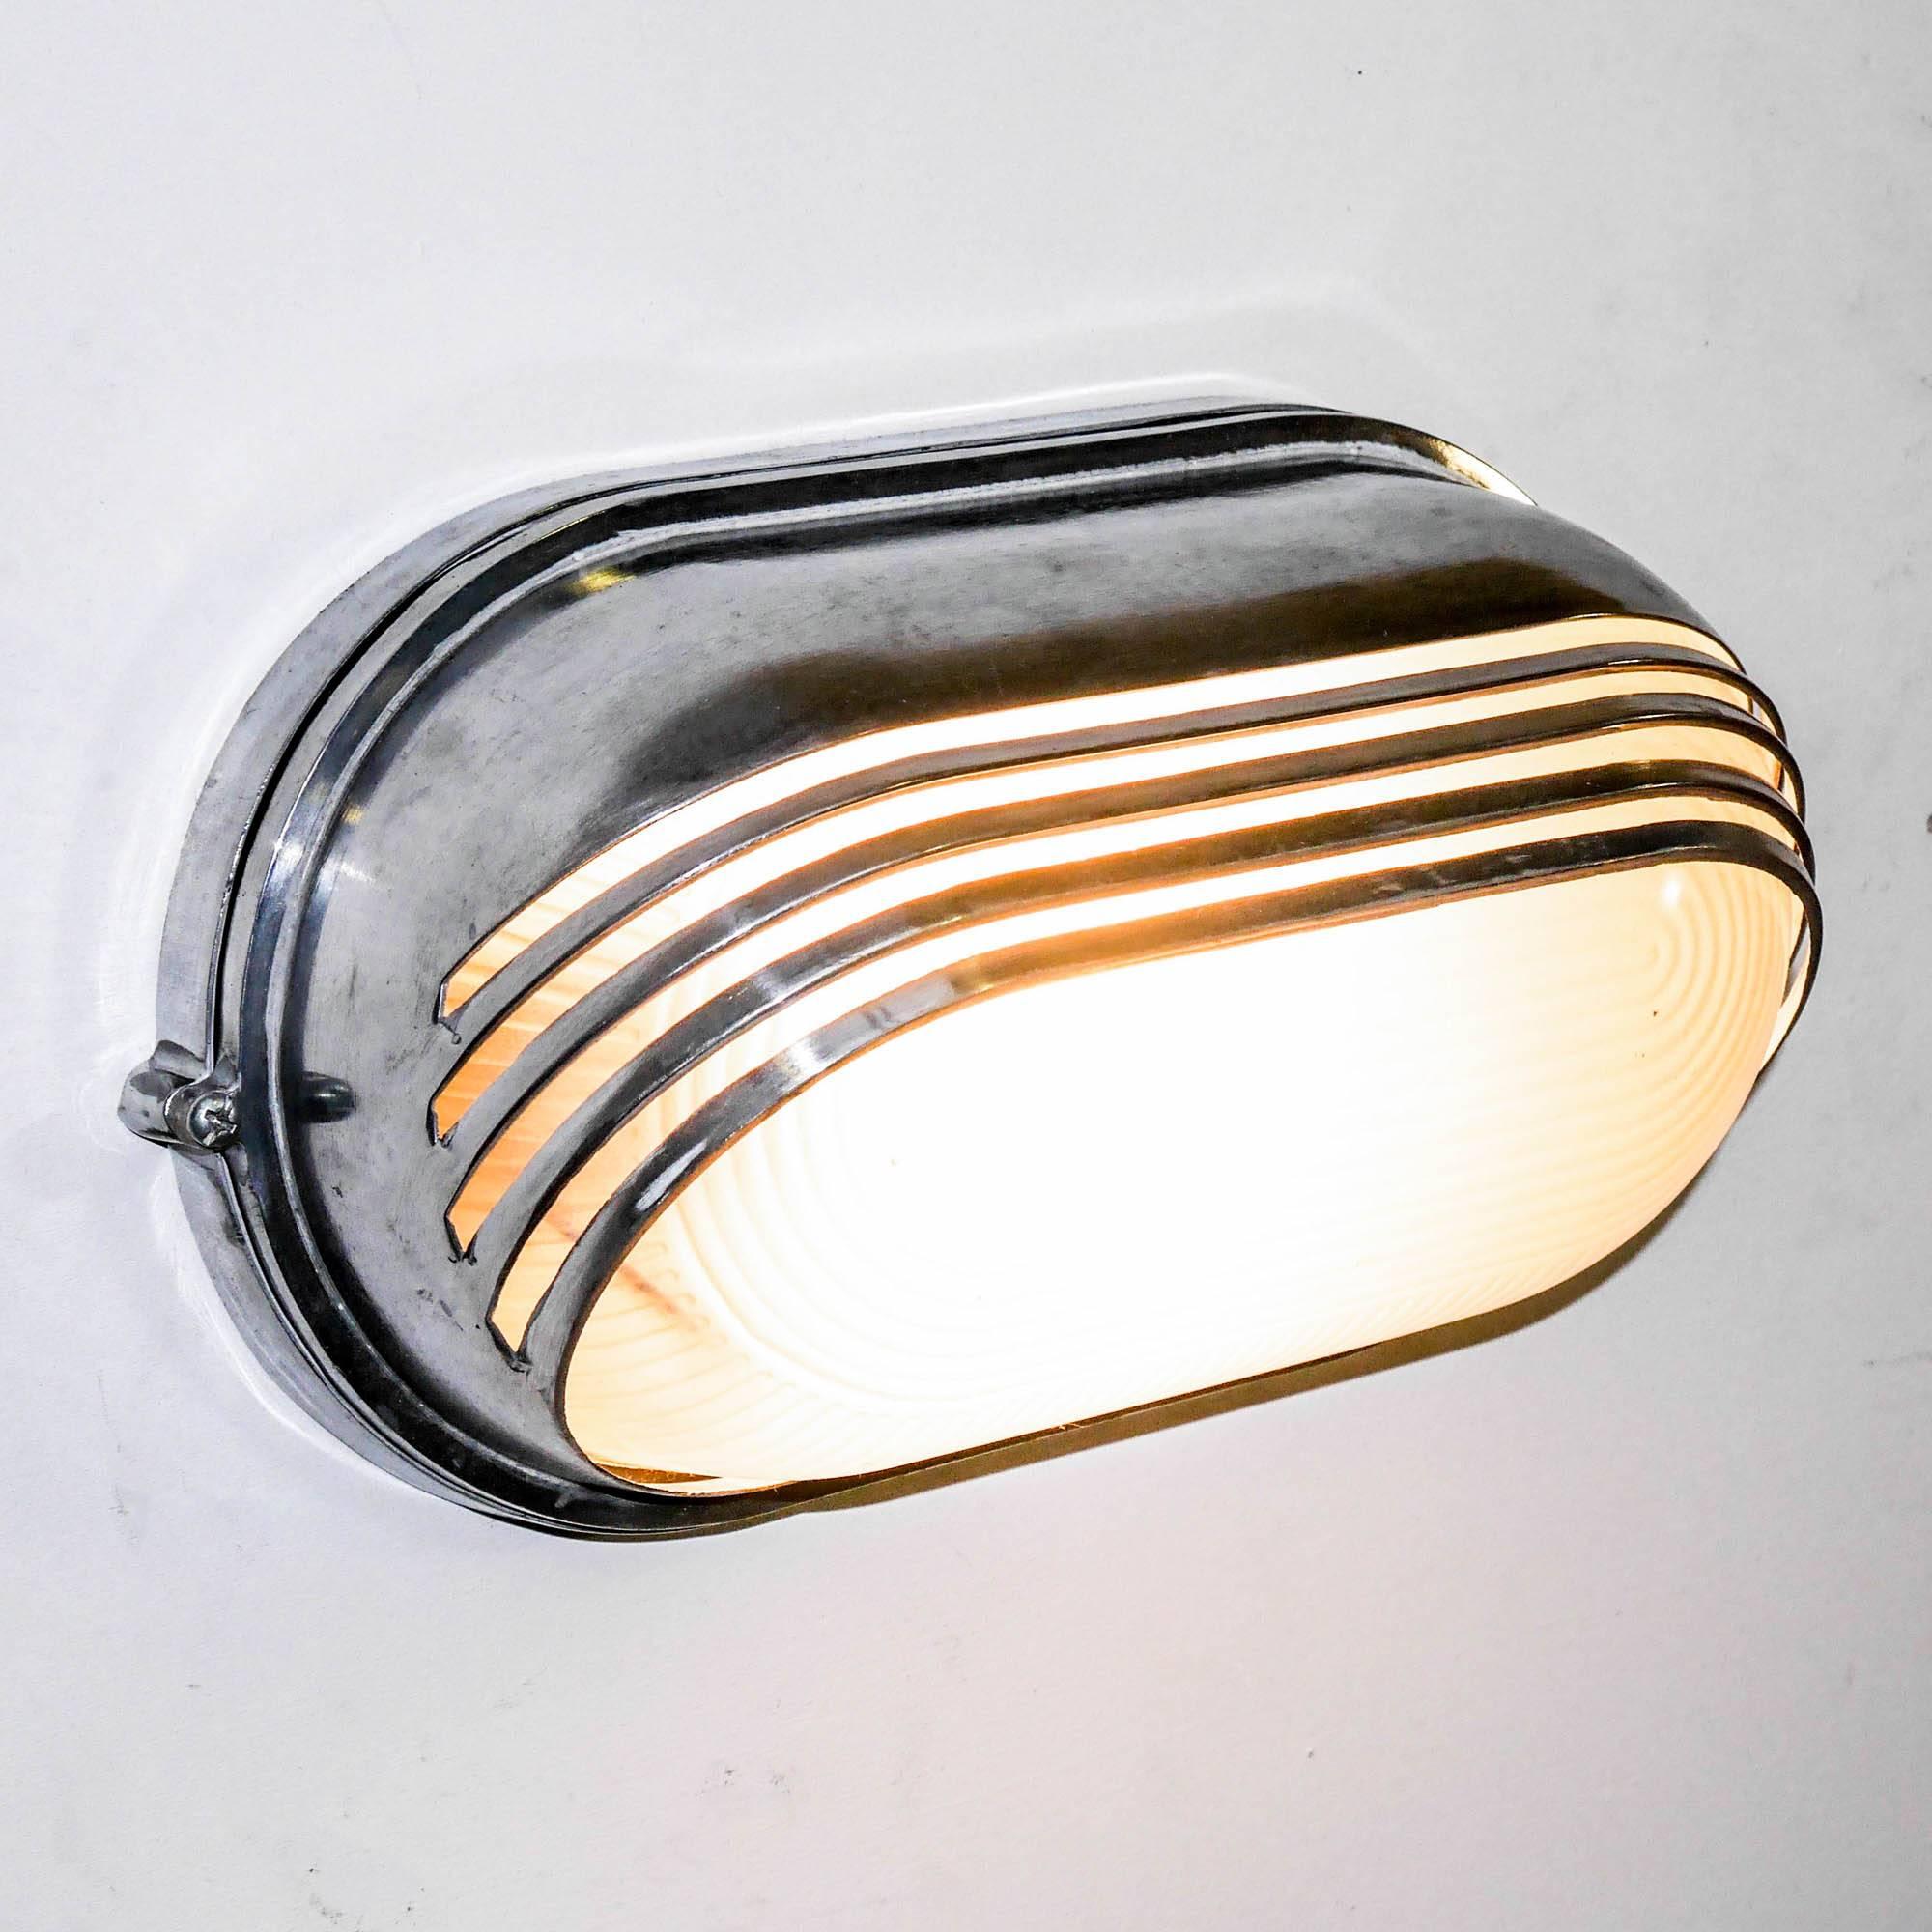 Industrial Openworked Wall Light Large, in Polished Aluminium and Reeded Glass, circa 1970